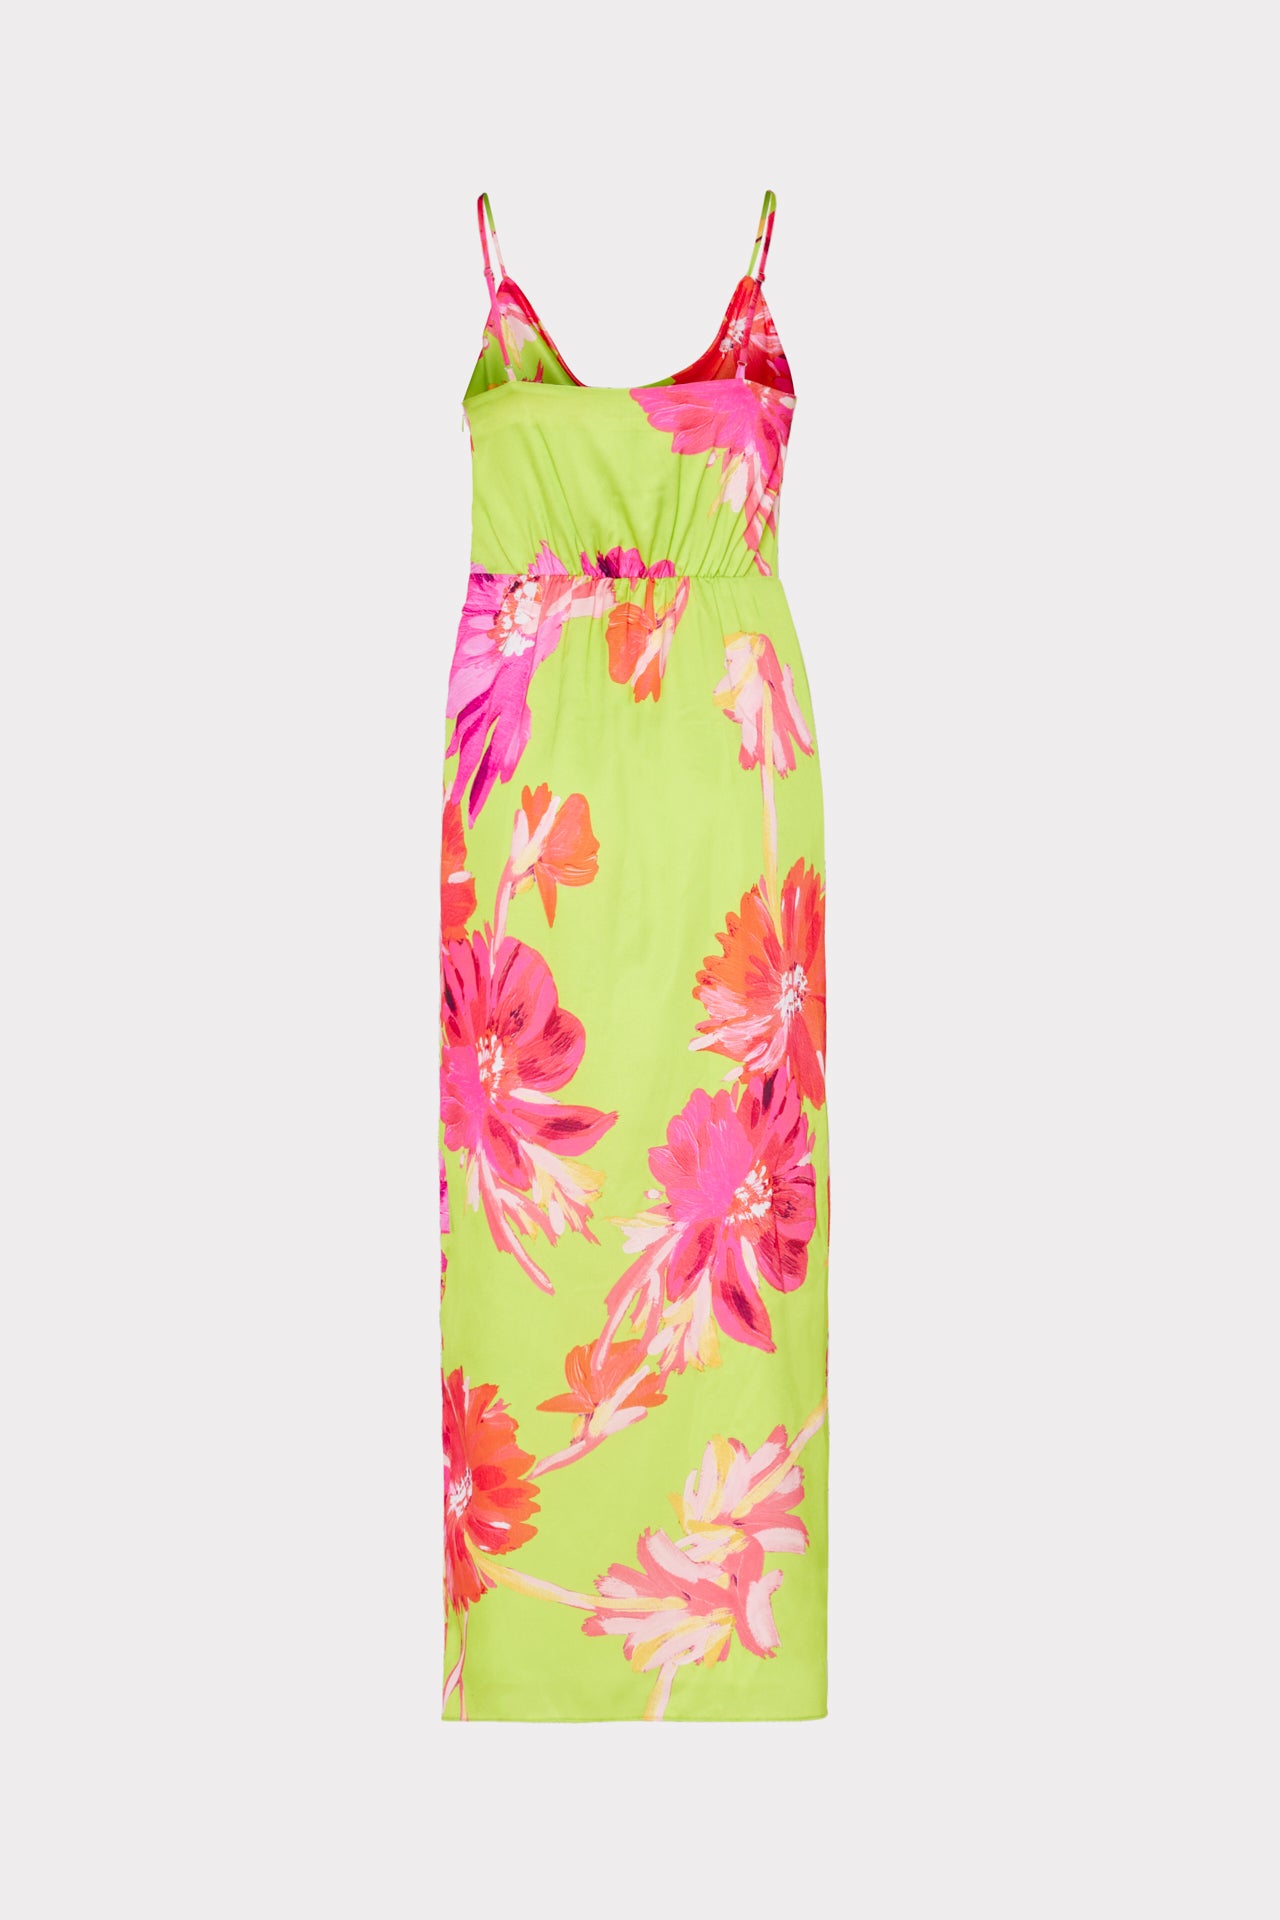 Lillana Floating Cosmos Maxi Dress in Chartreuse Multi Floral Print | MILLY